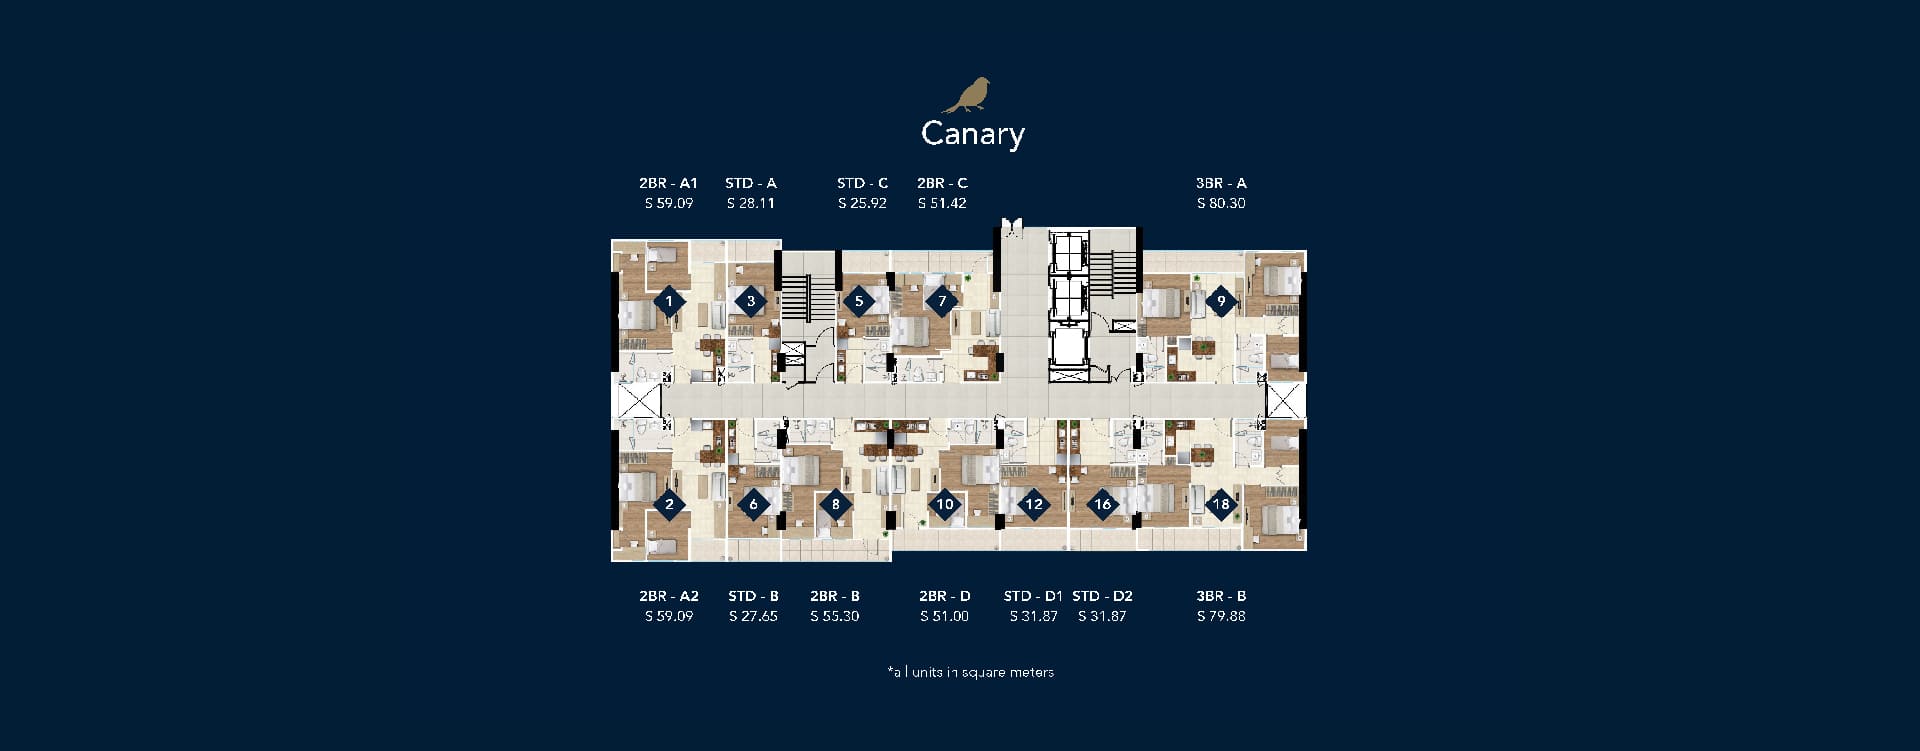 Site-Plan-Tower-Canary-Daan-Mogot-City.